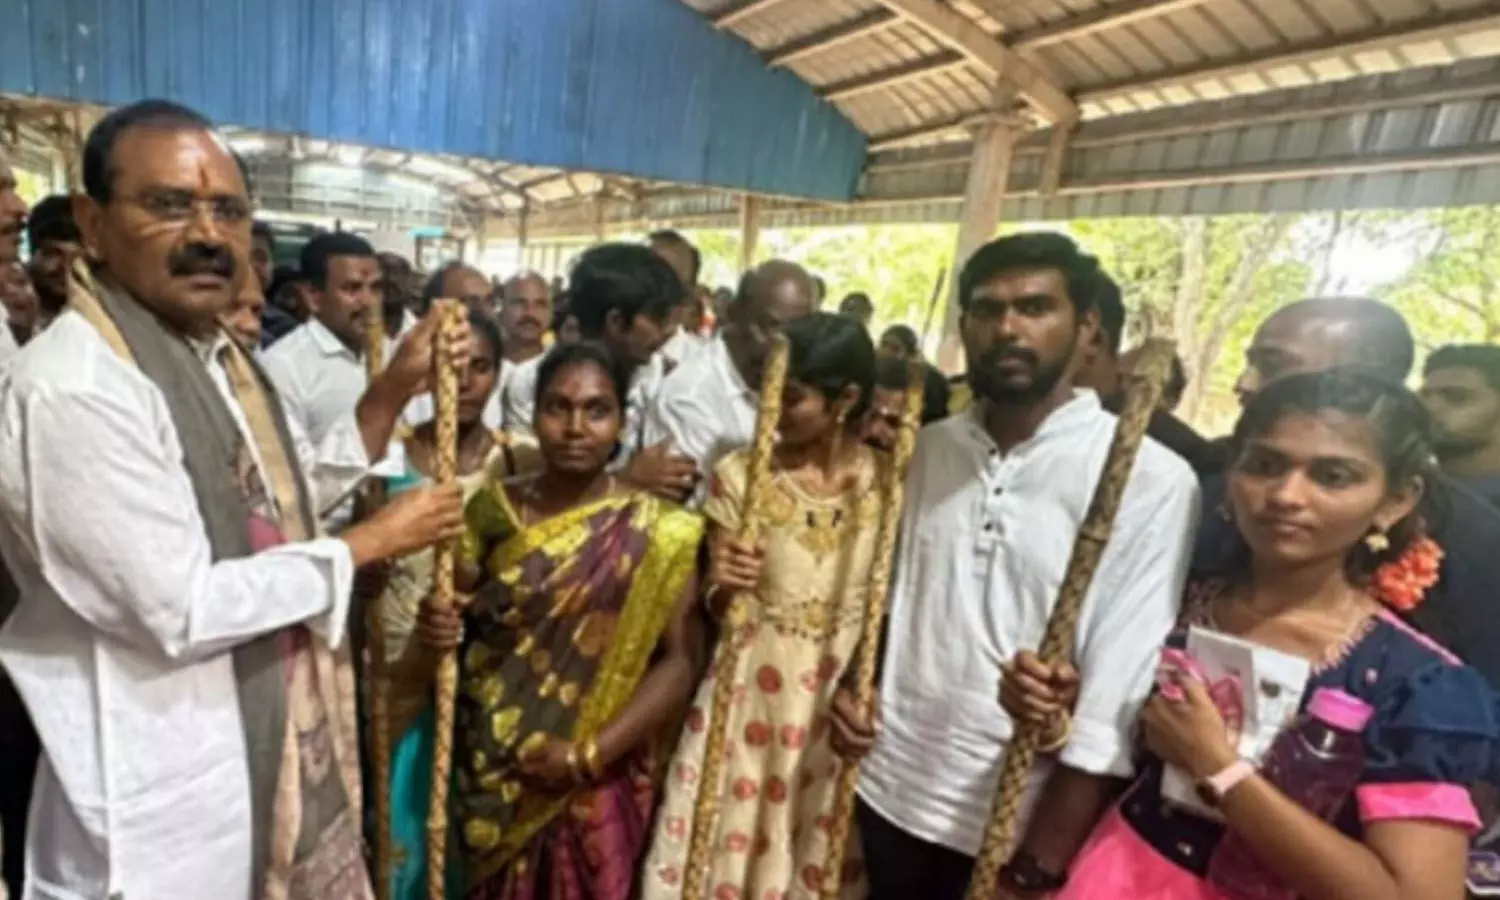 Leopard attack: TTD defends its decision to give sticks to devotees for protection